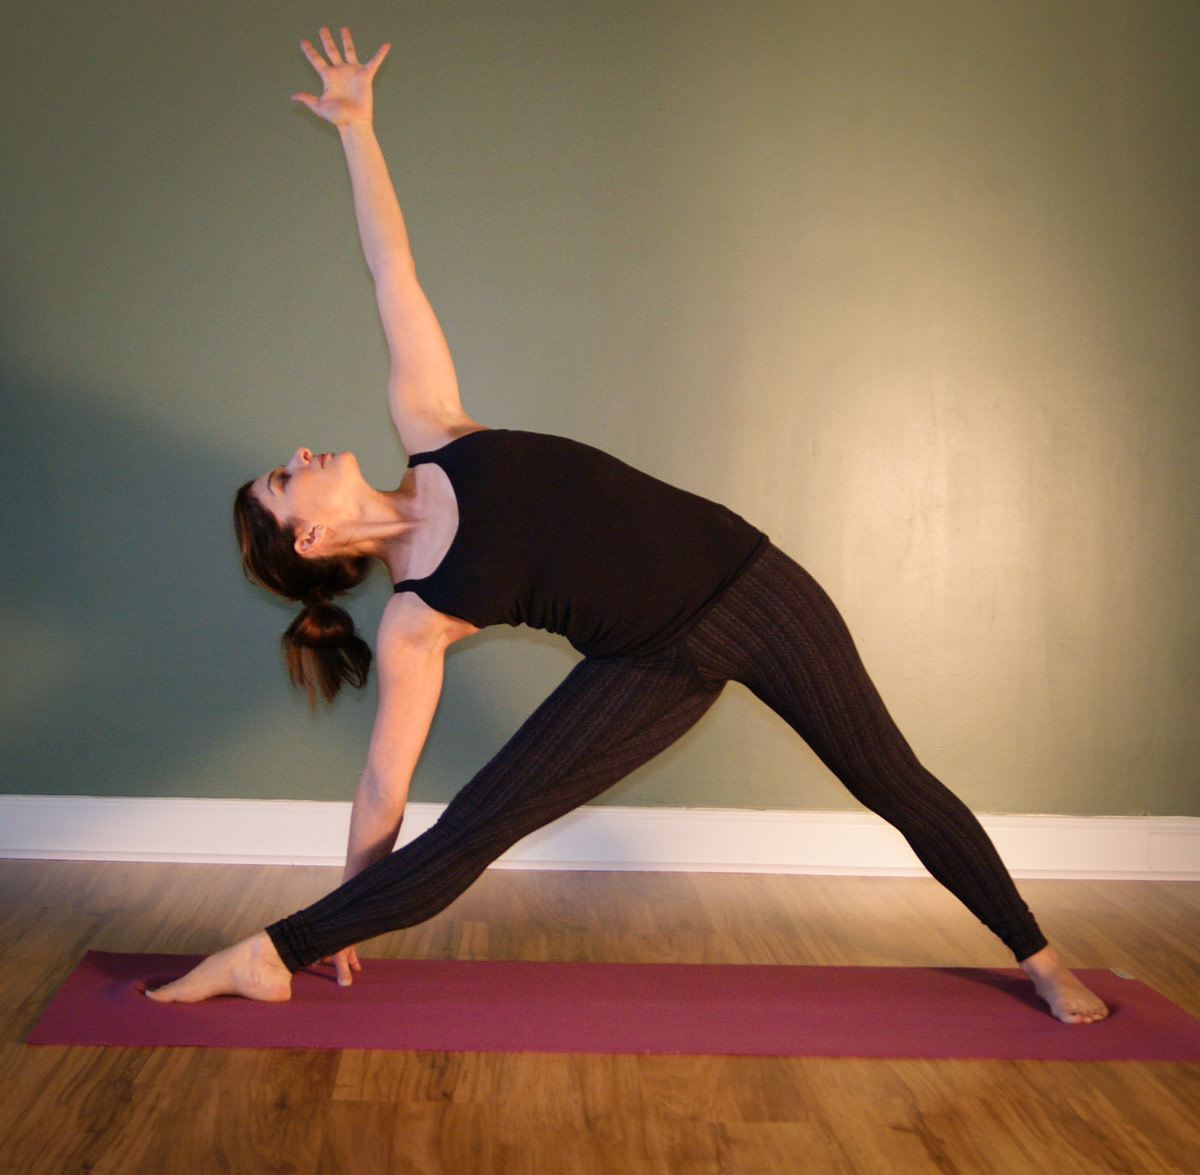 Doing Plank Pose Daily Helps Promote Healthy Aging | Woman's World